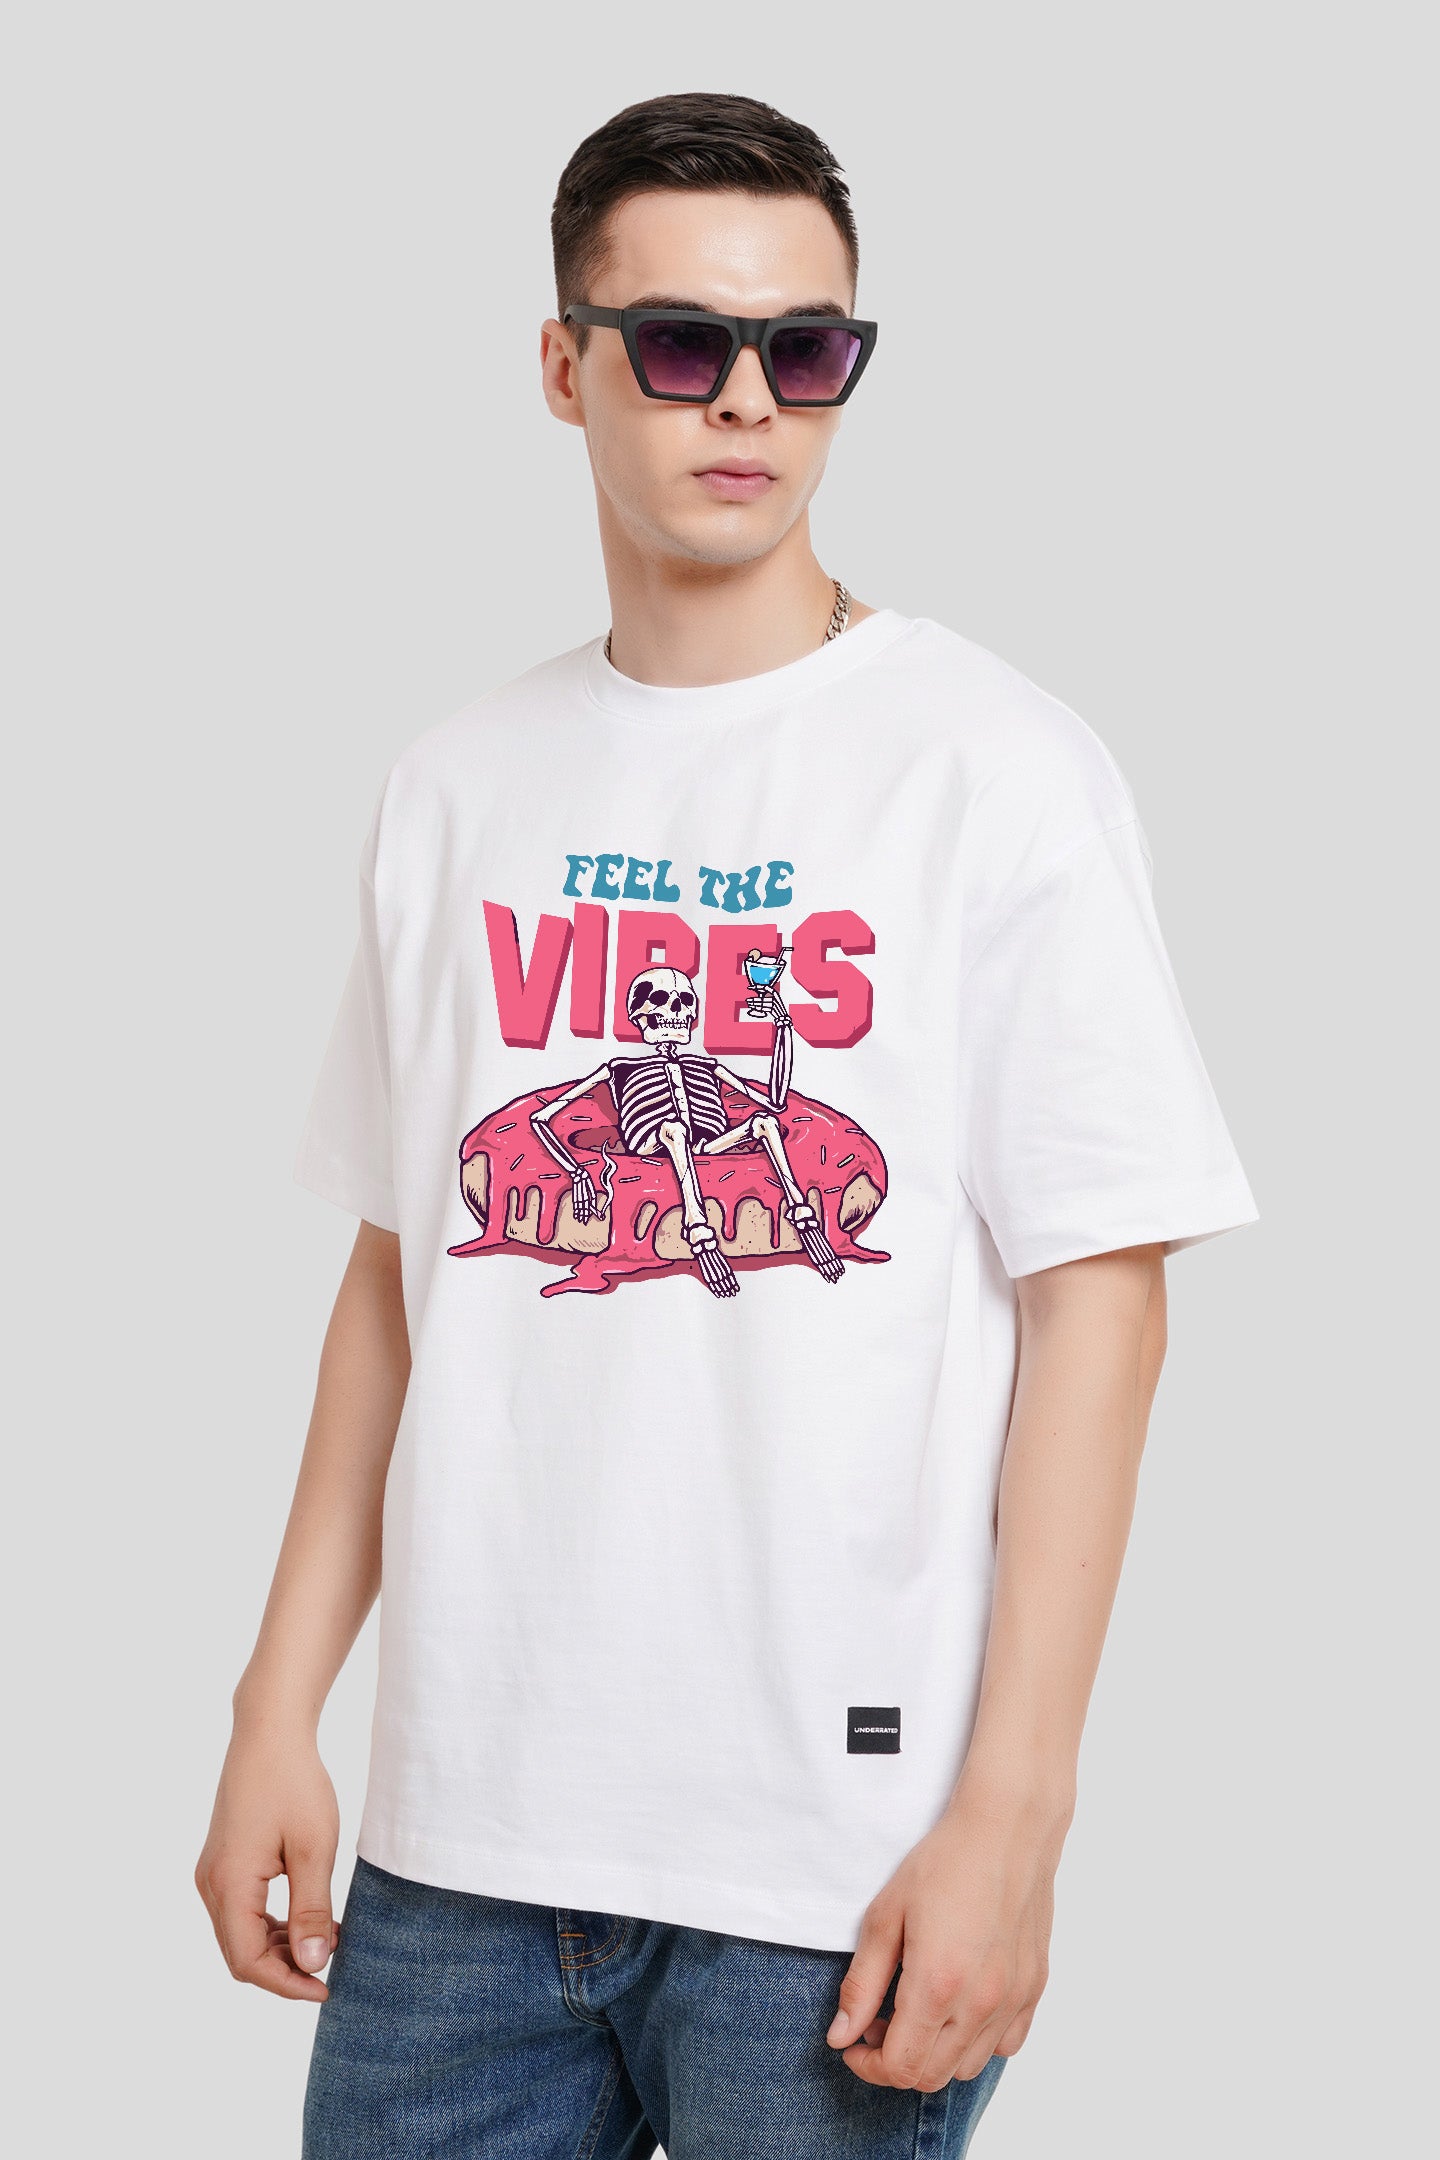 Feel The Vibe White Printed T Shirt Men Oversized Fit With Front Design Pic 1